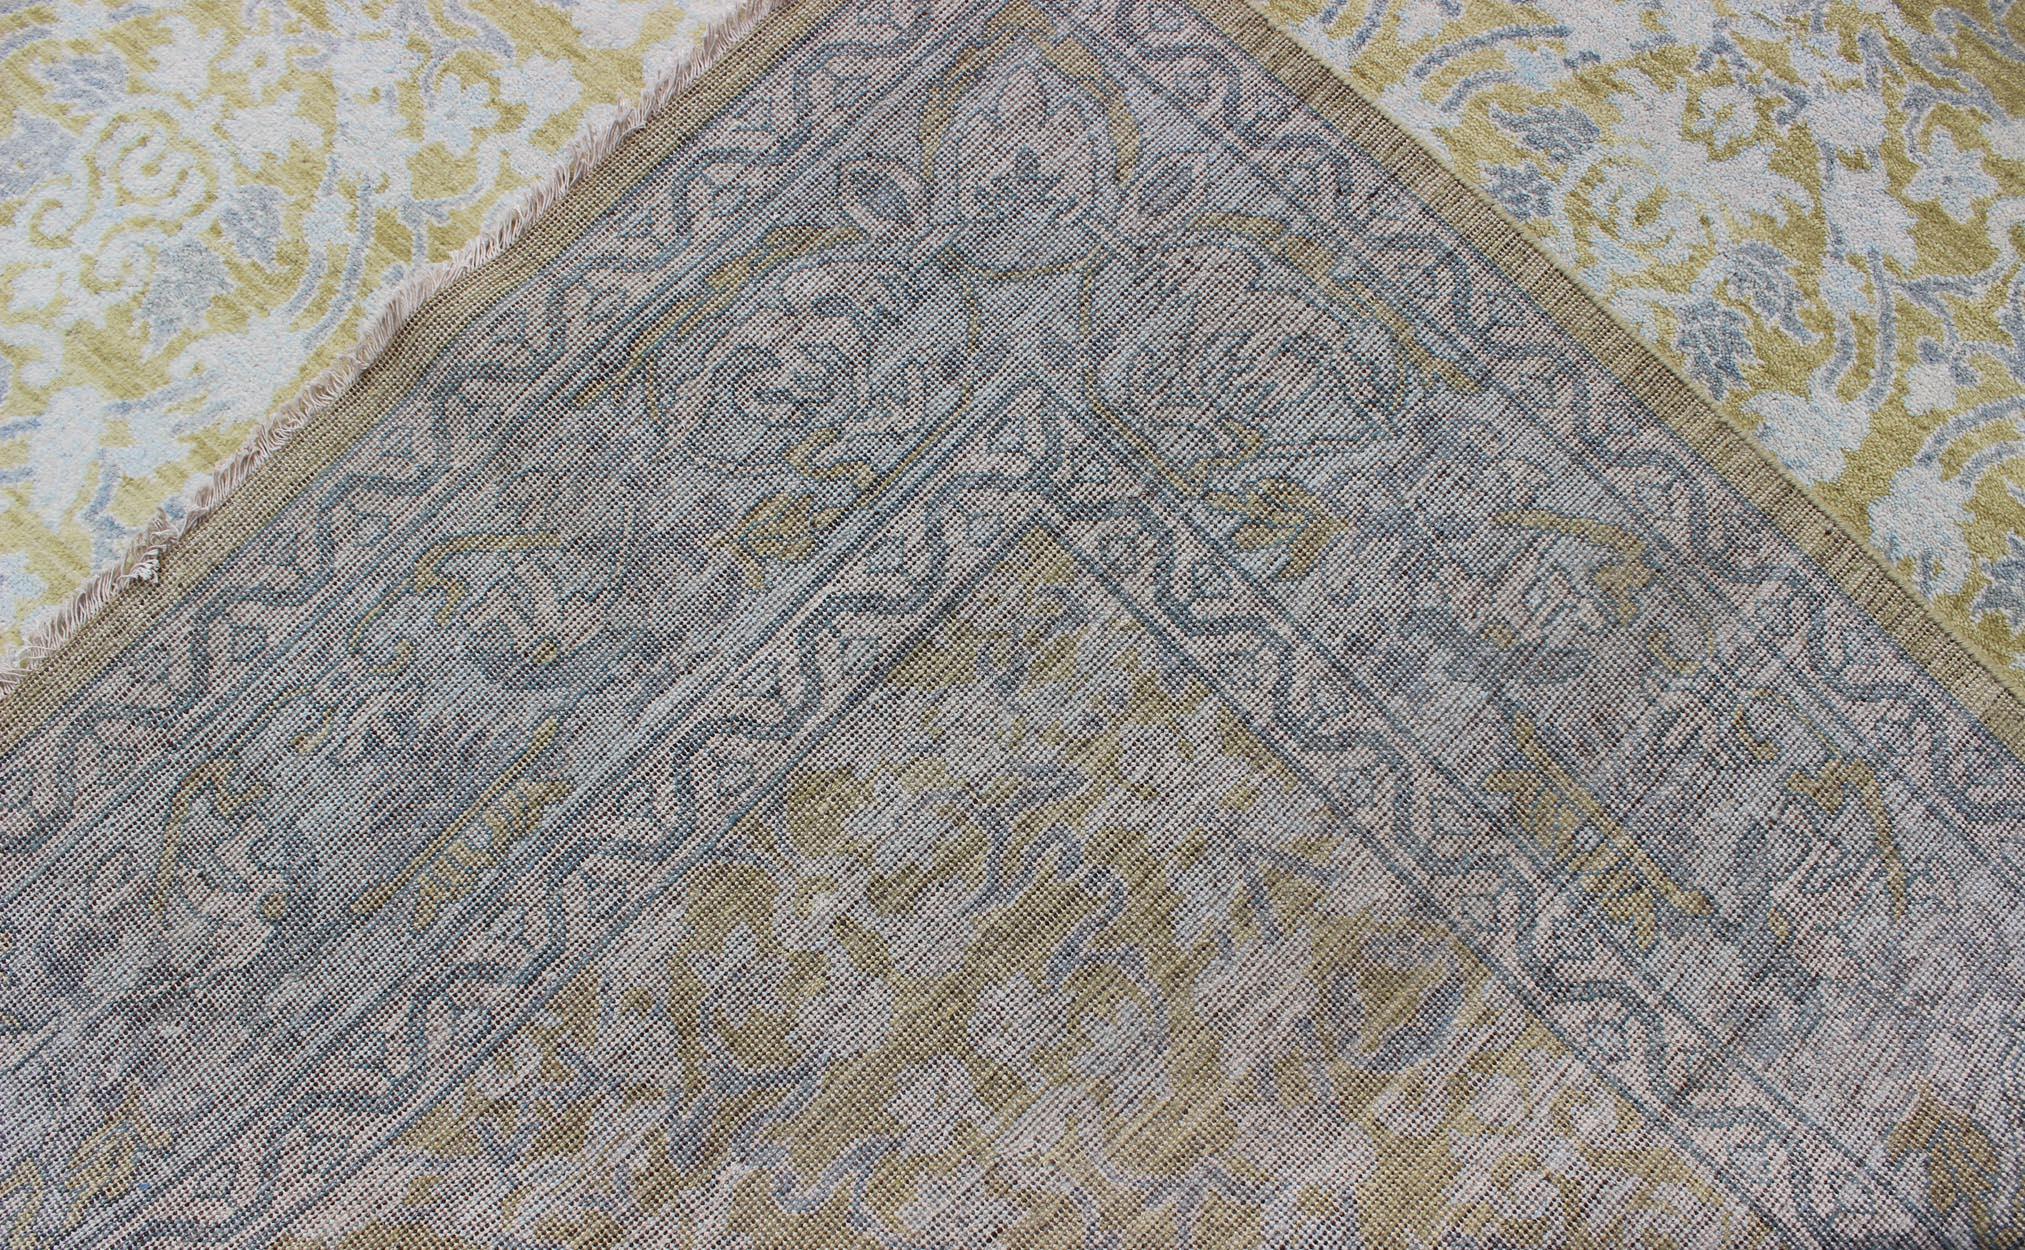 Spanish Design Rug with All-Over Floral Pattern in Acid Yellow Green Grey & Blue In Excellent Condition For Sale In Atlanta, GA